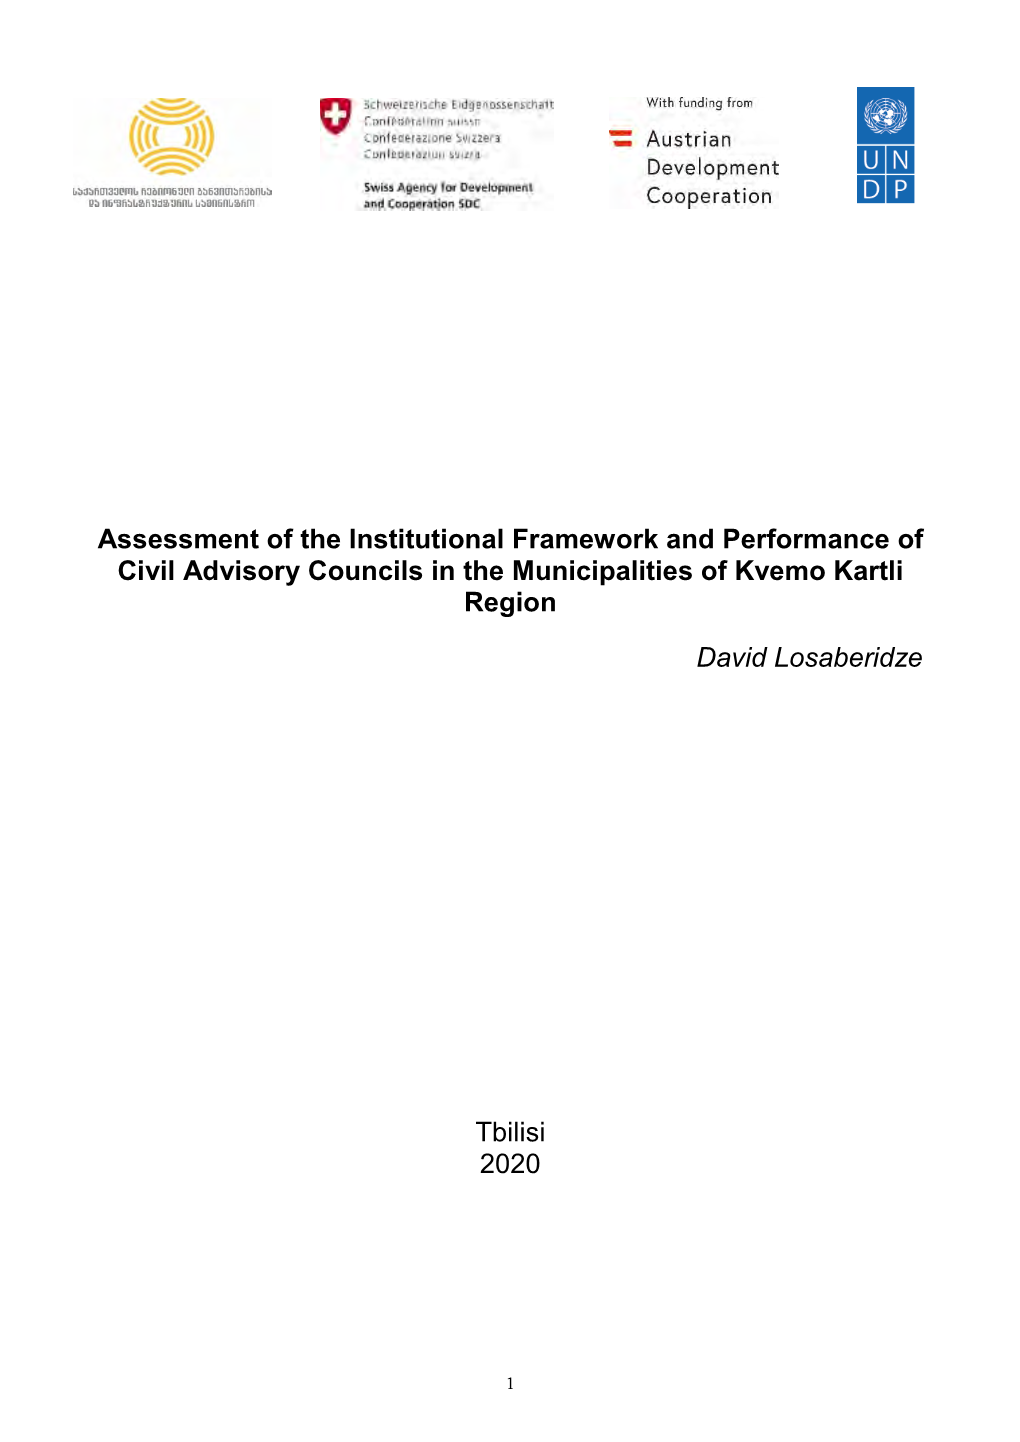 Assessment of the Institutional Framework and Performance of Civil Advisory Councils in the Municipalities of Kvemo Kartli Region